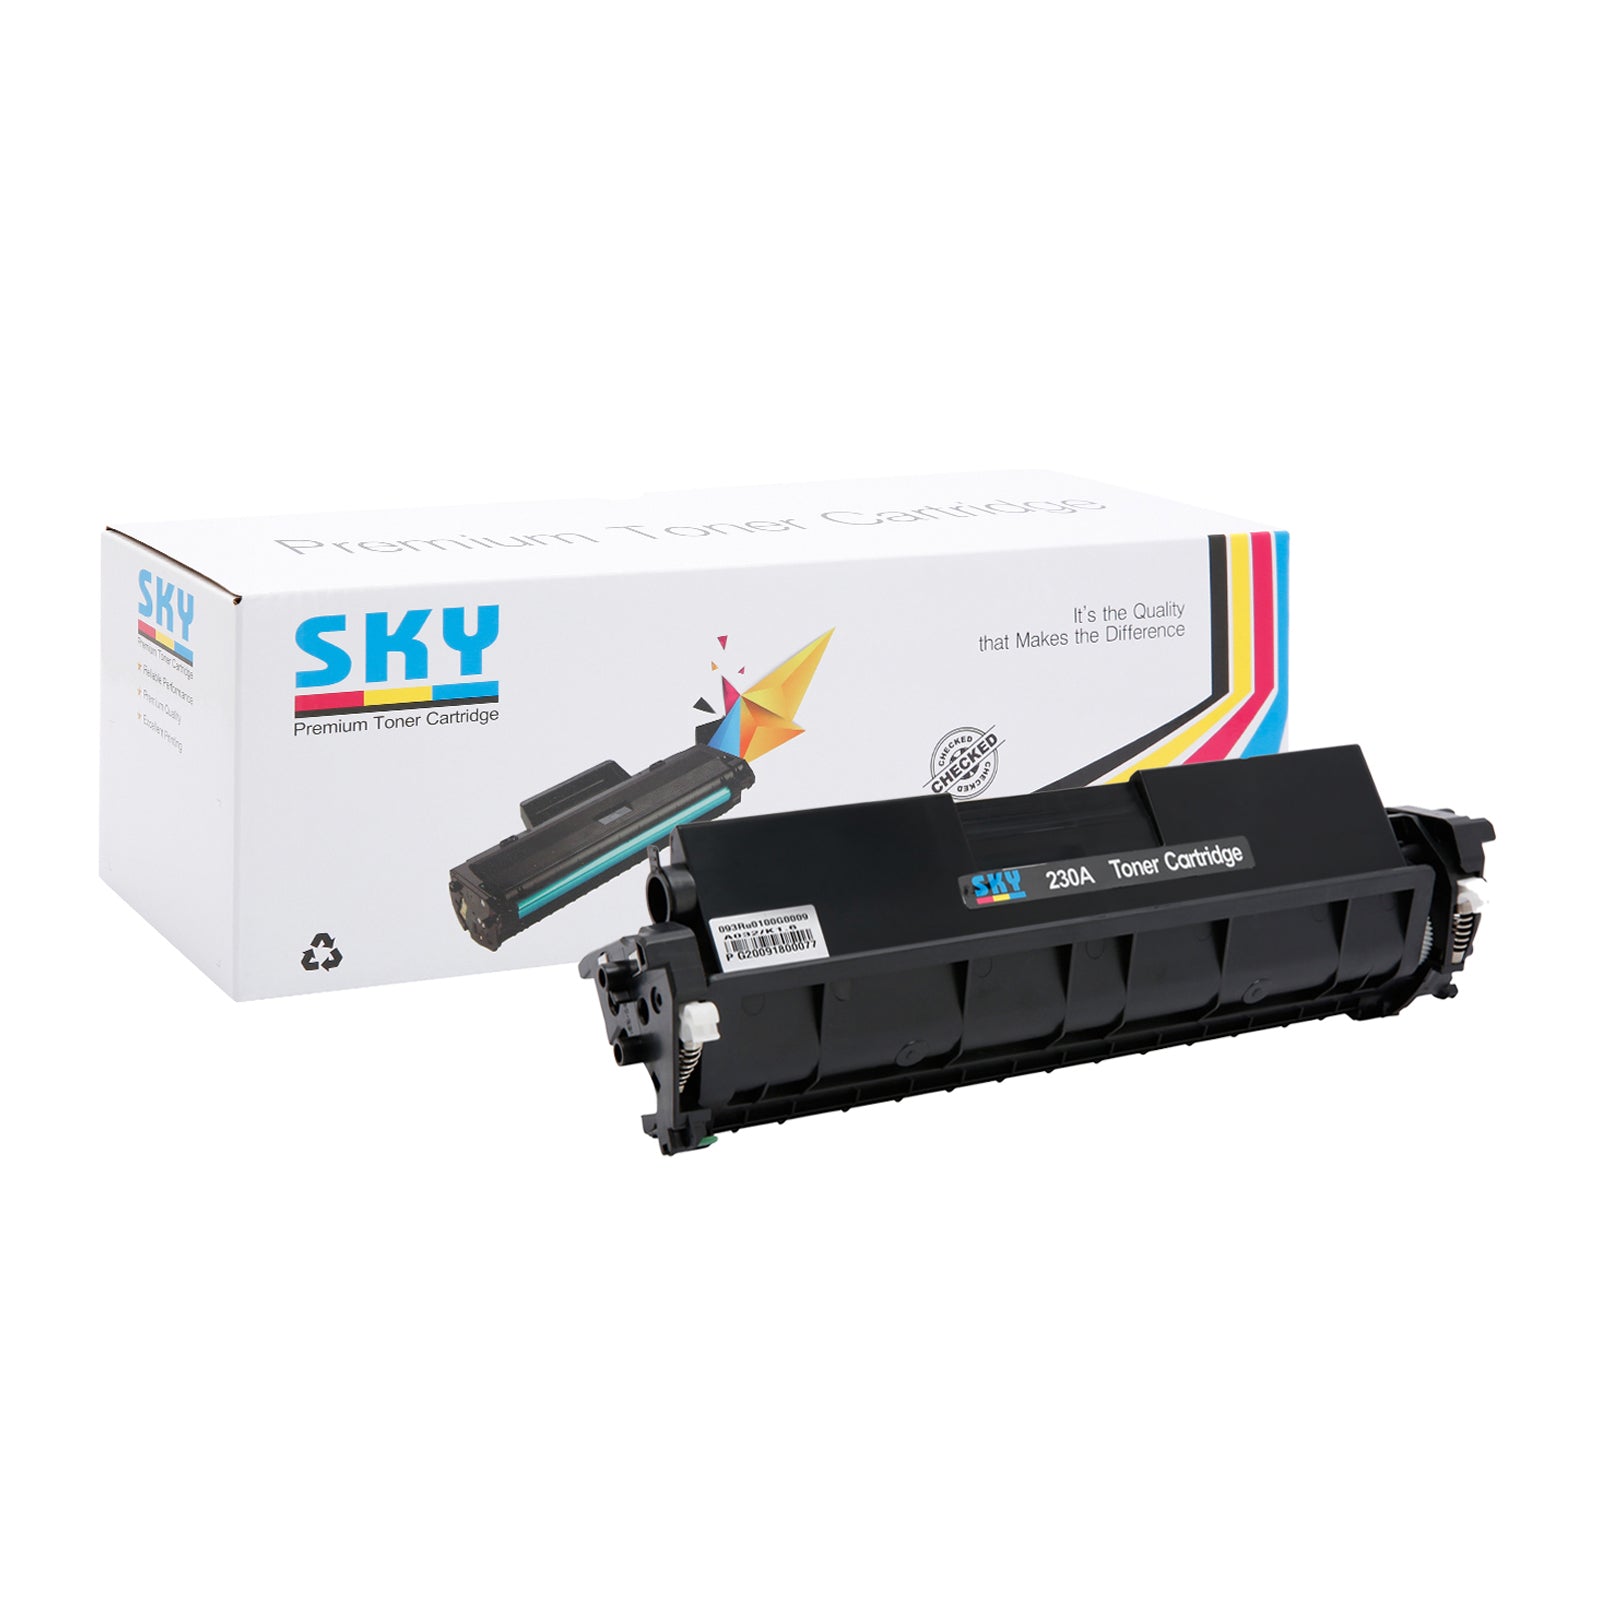 SKY 30A Toner Cartridge CF230A for HP Laserjet Pro M203 and MFP M227 series Printers